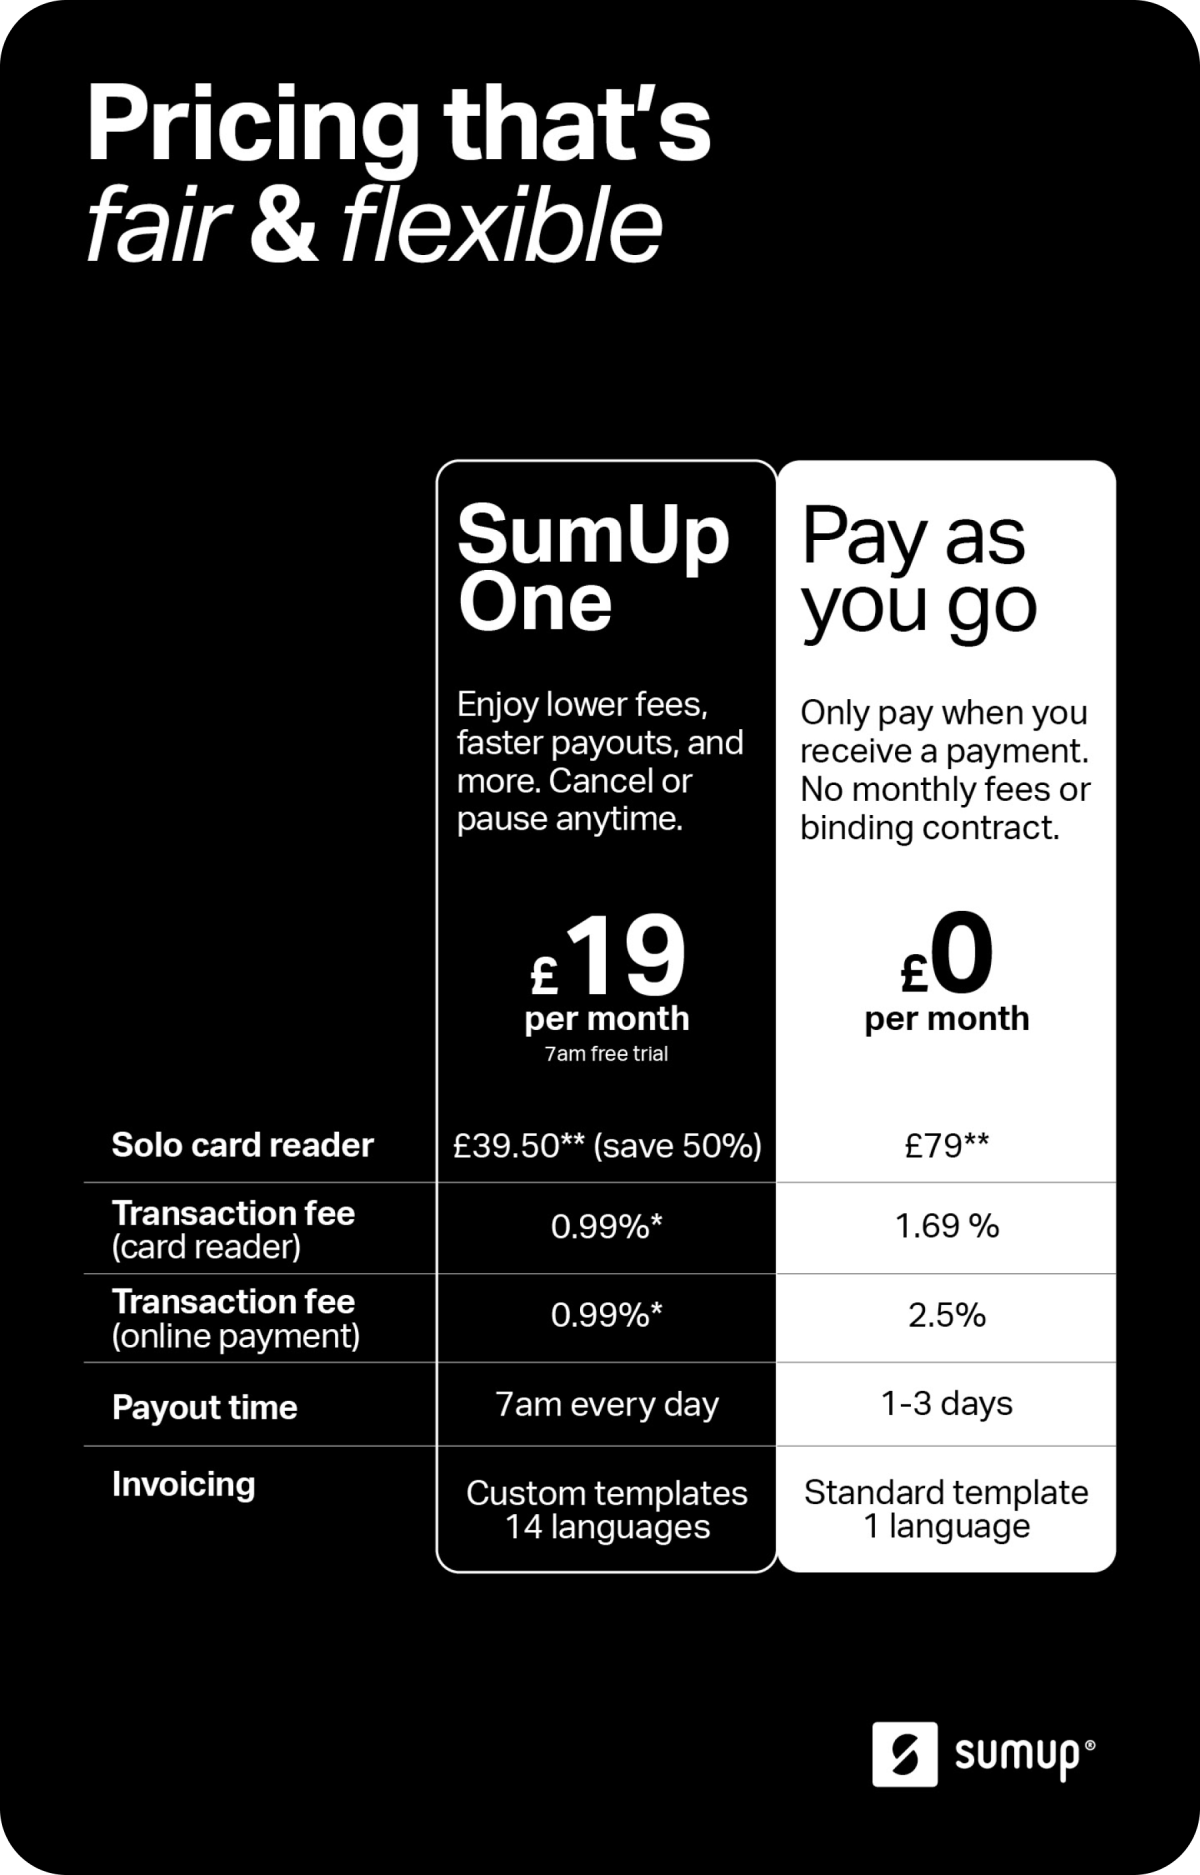 Image showing the differences between the SumUp One plan and the Pay-as-you-go option. With SumUp One, you save 50% on a SumUp Solo card reader, over 50% on transaction fees, you get next day payouts every day, full invoicing software and priority support.